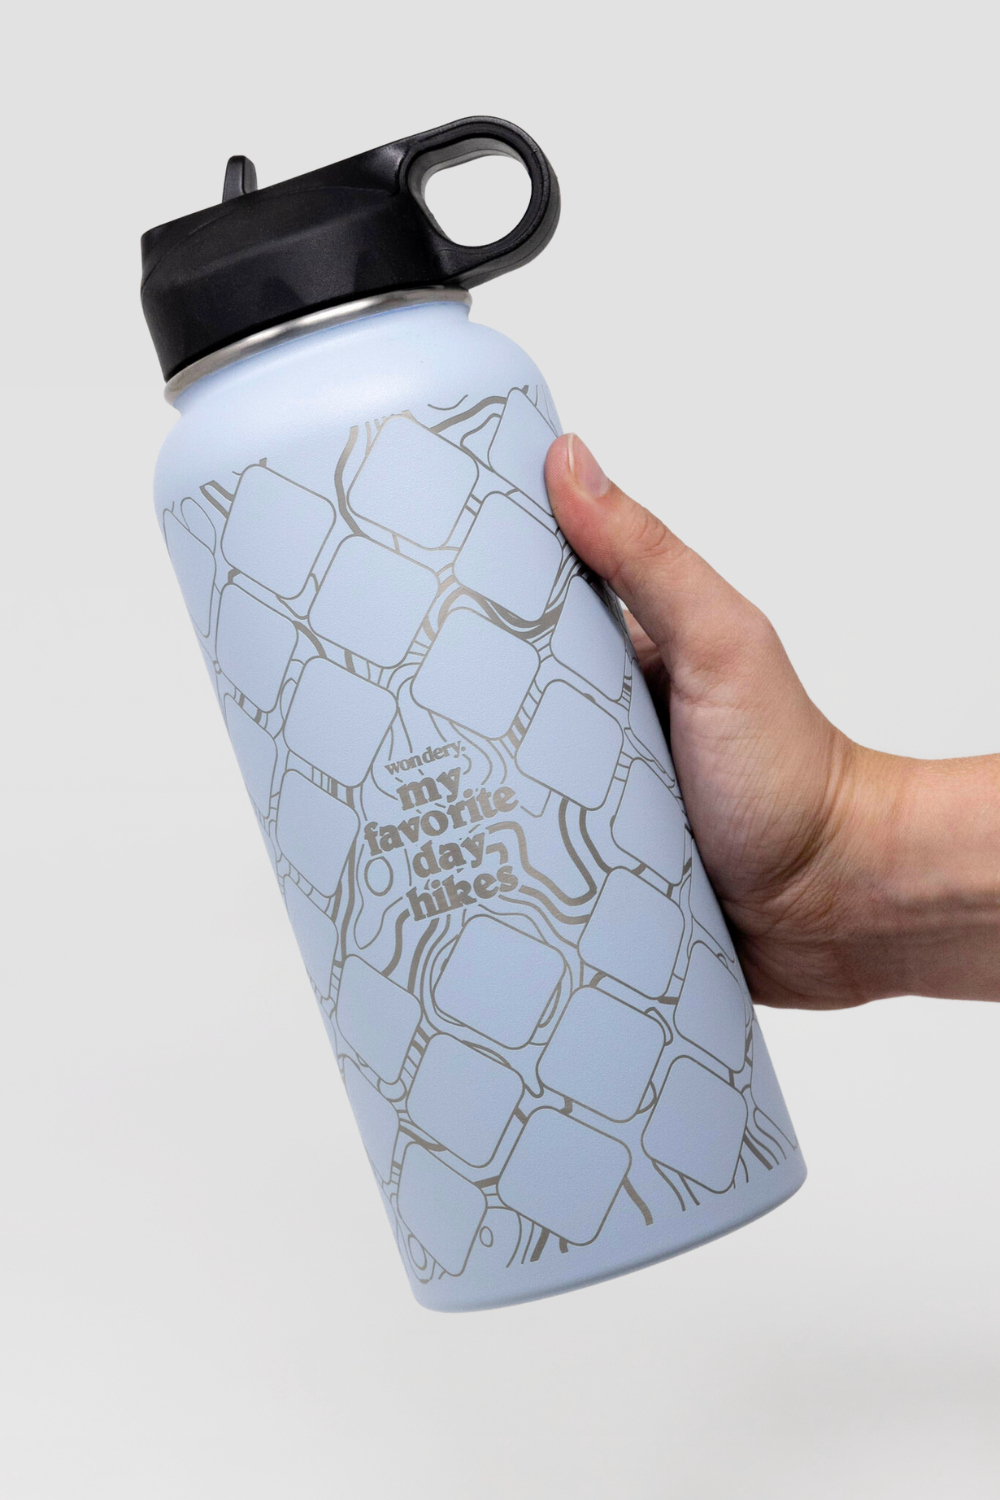 How does a Hydro Flask keep water cold? - Southern Man